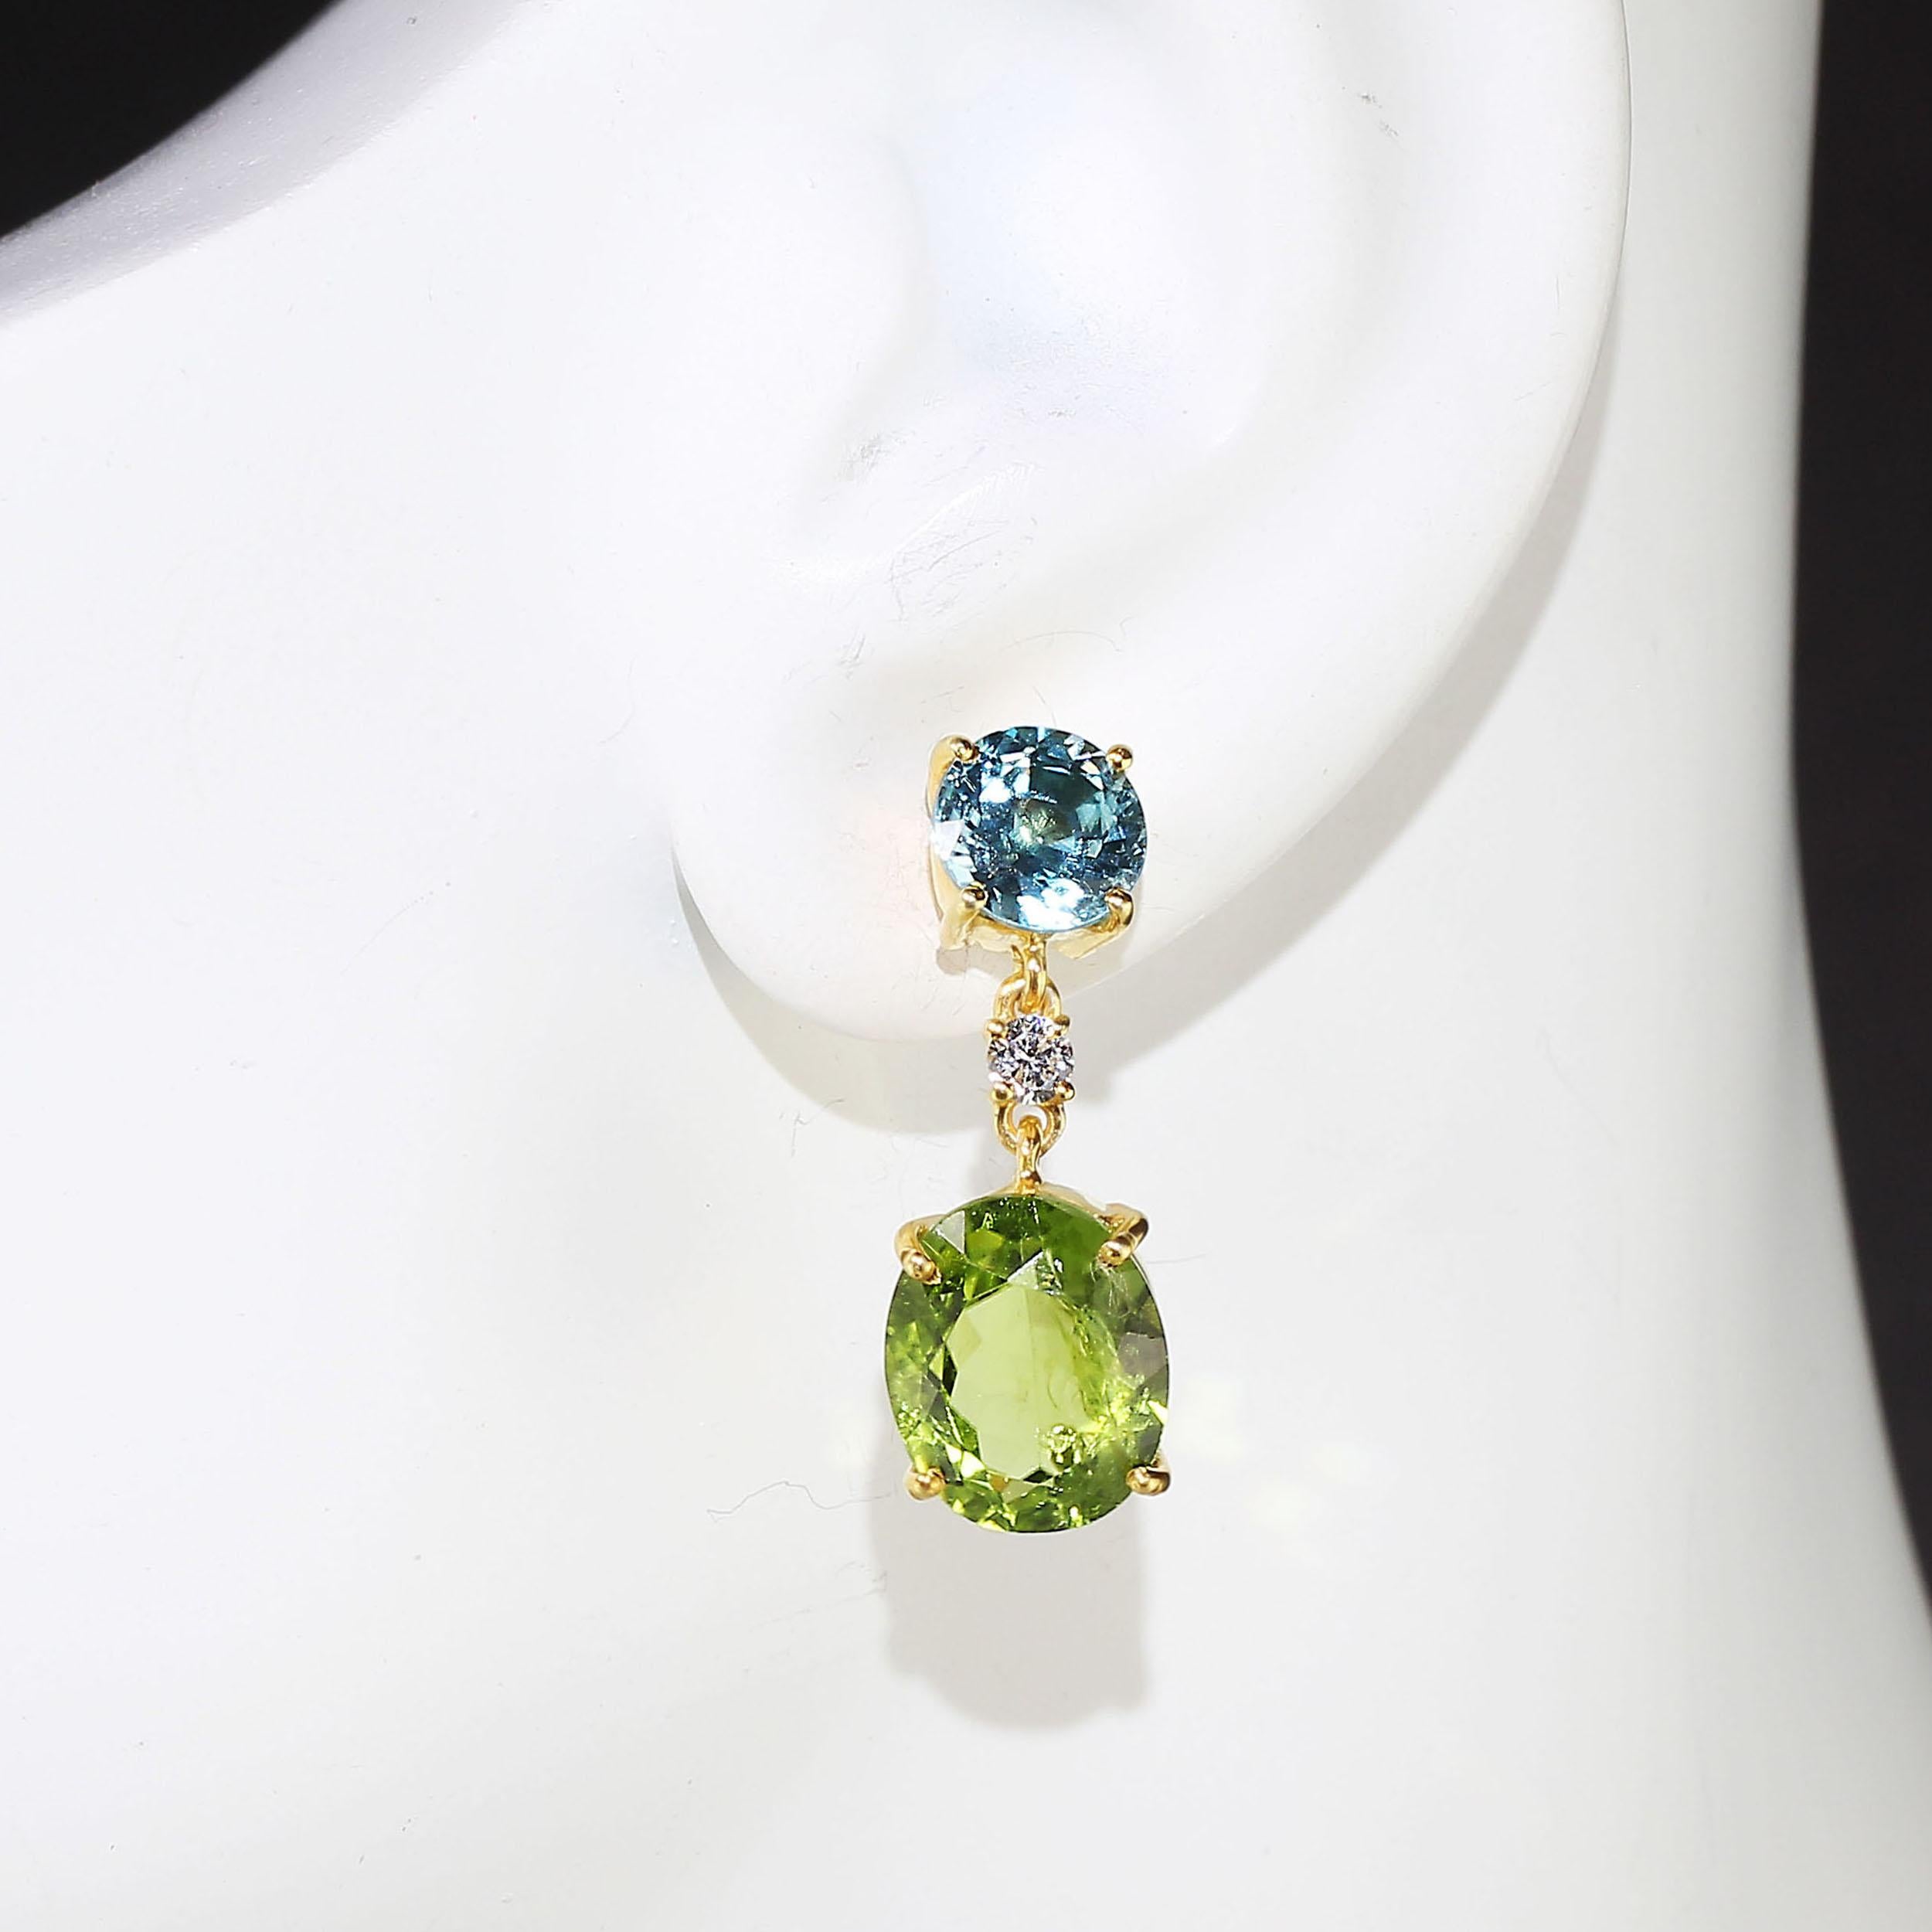 Ear Swag!! Sizzling Earrings of sparkling Green Peridot and neon Blue Zircons. These jewels are a must for every fun loving earring wearer! The bright blue Cambodian Zircons are set with push back posts. From the Blue Zircons are hung clear Zircons